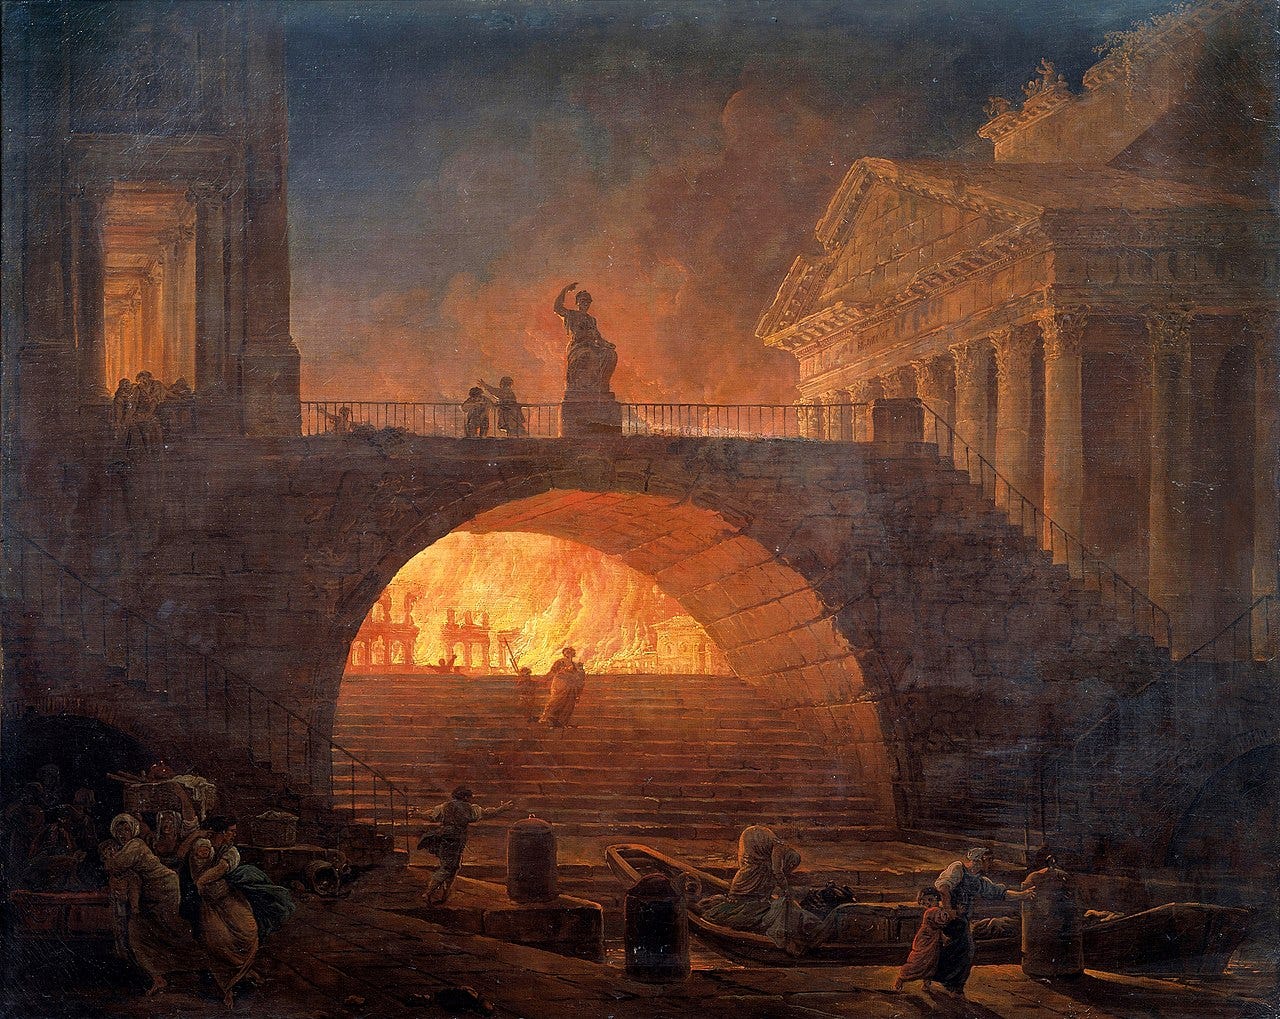 A depiction of the fire burning through the city.